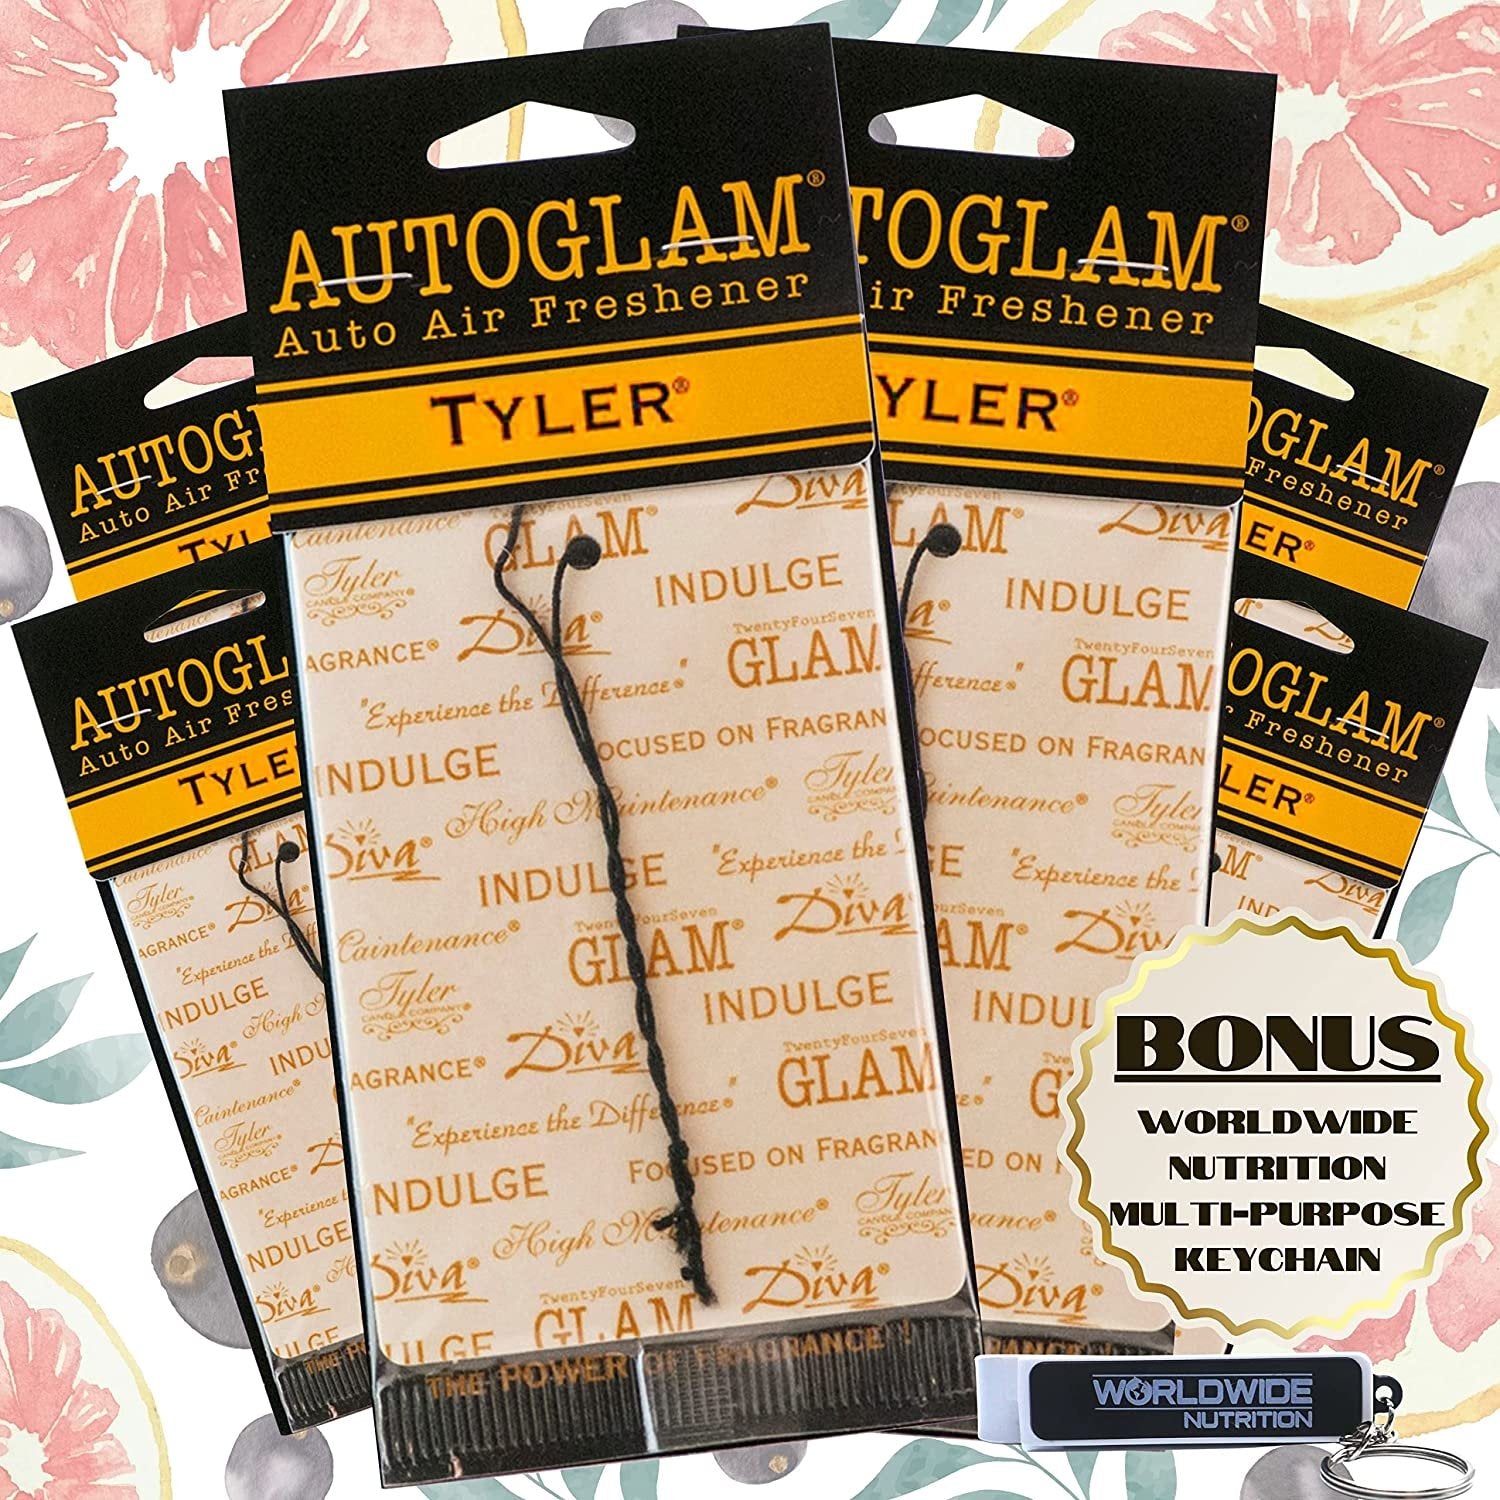 Tyler Candle Company AutoGlam Car Air Fresheners - Tyler Scent Car Fresheners | Car Odor Eliminator Air Refresher | Car Accessories - Pack of 6 w Worldwide Nutrition Multi Purpose Key Chain